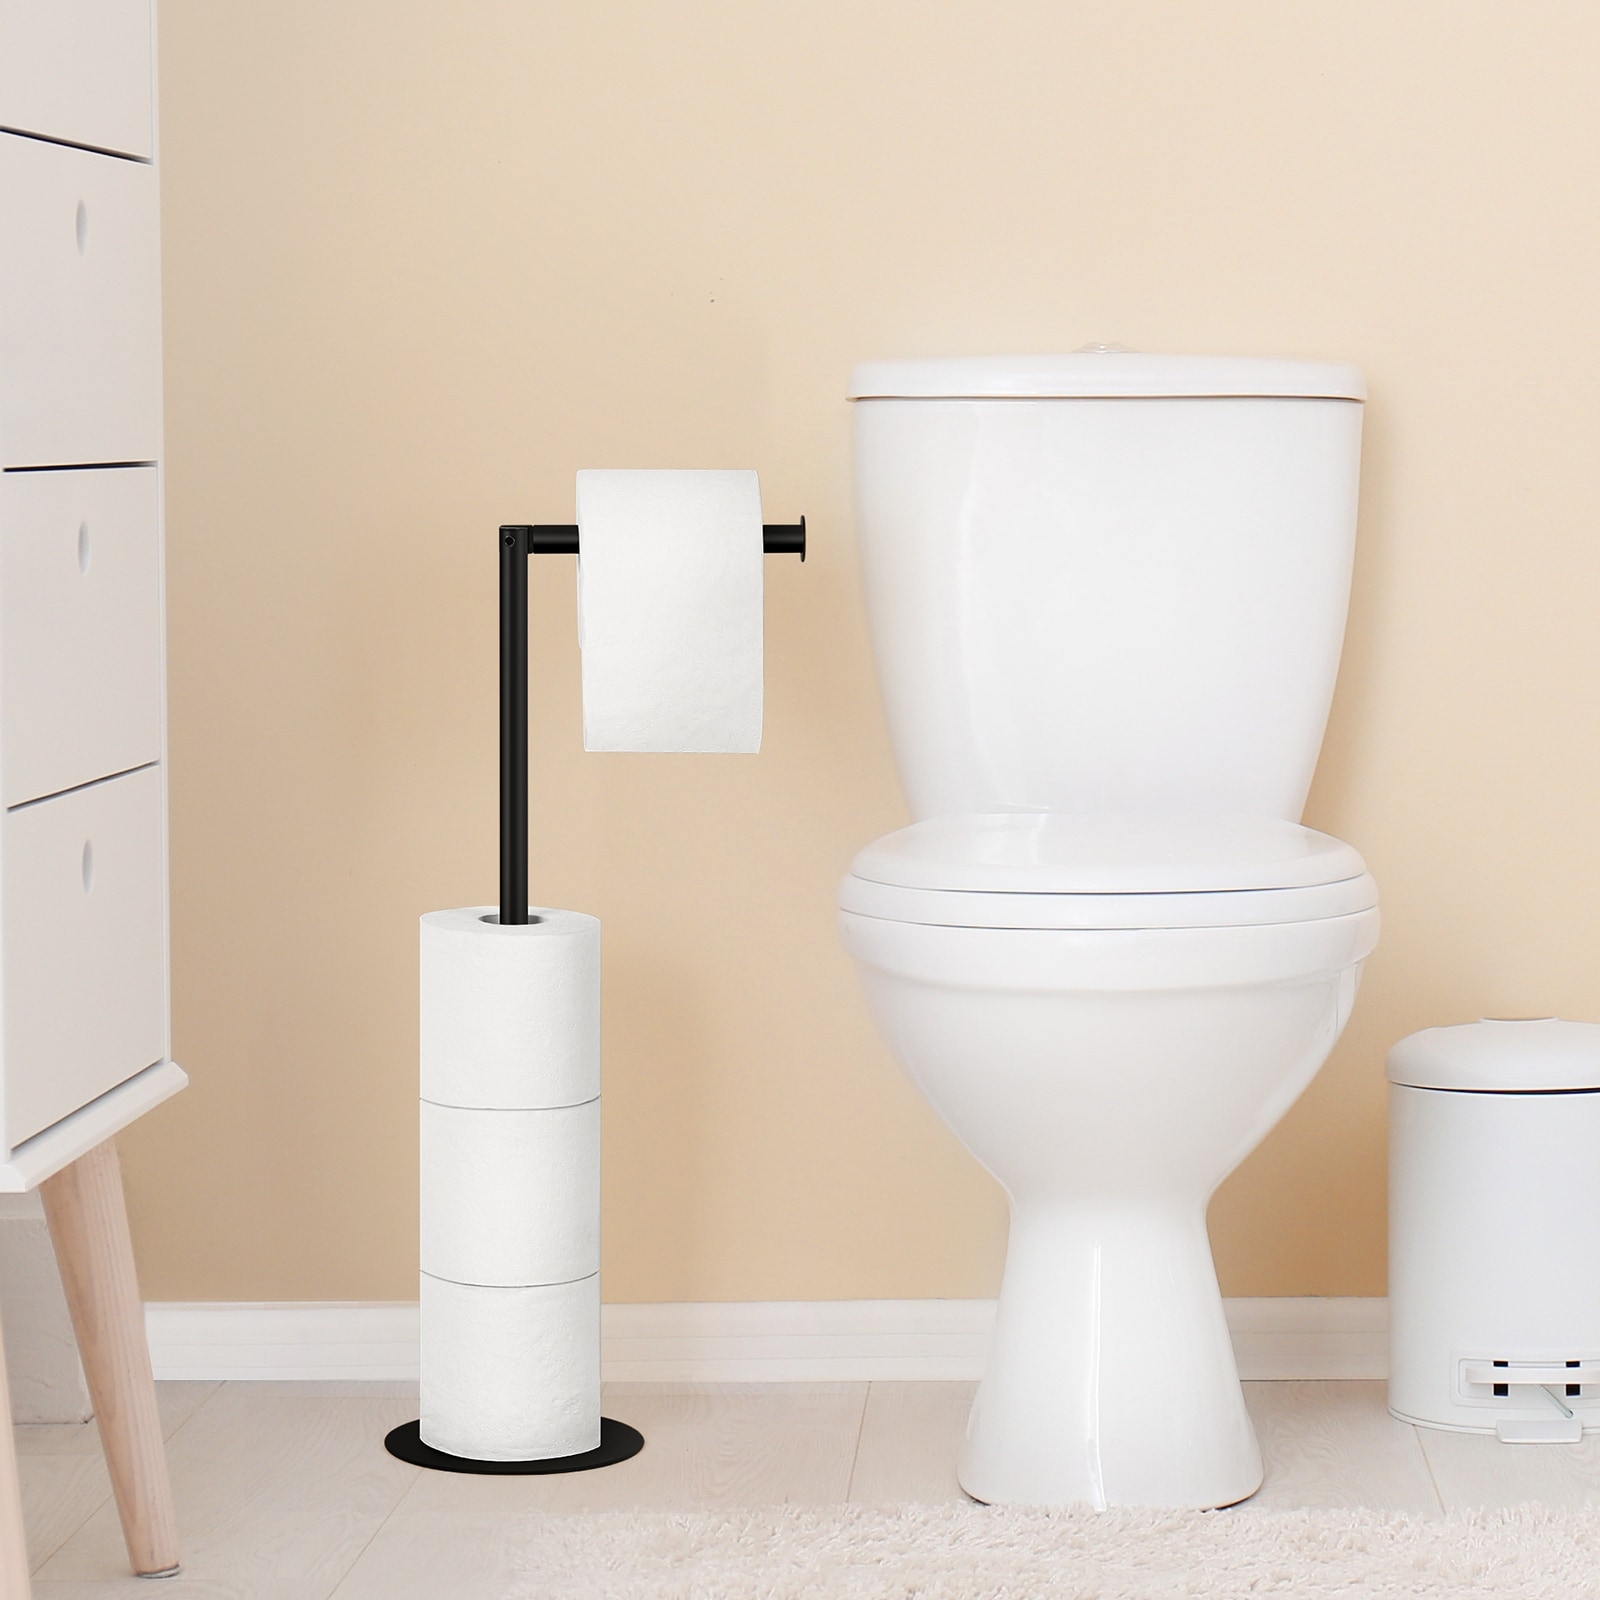 https://ak1.ostkcdn.com/images/products/is/images/direct/396de28578050feff41f271c70c0175e894aaf9e/Free-Standing-Toilet-Paper-Holder-for-Bathroom.jpg